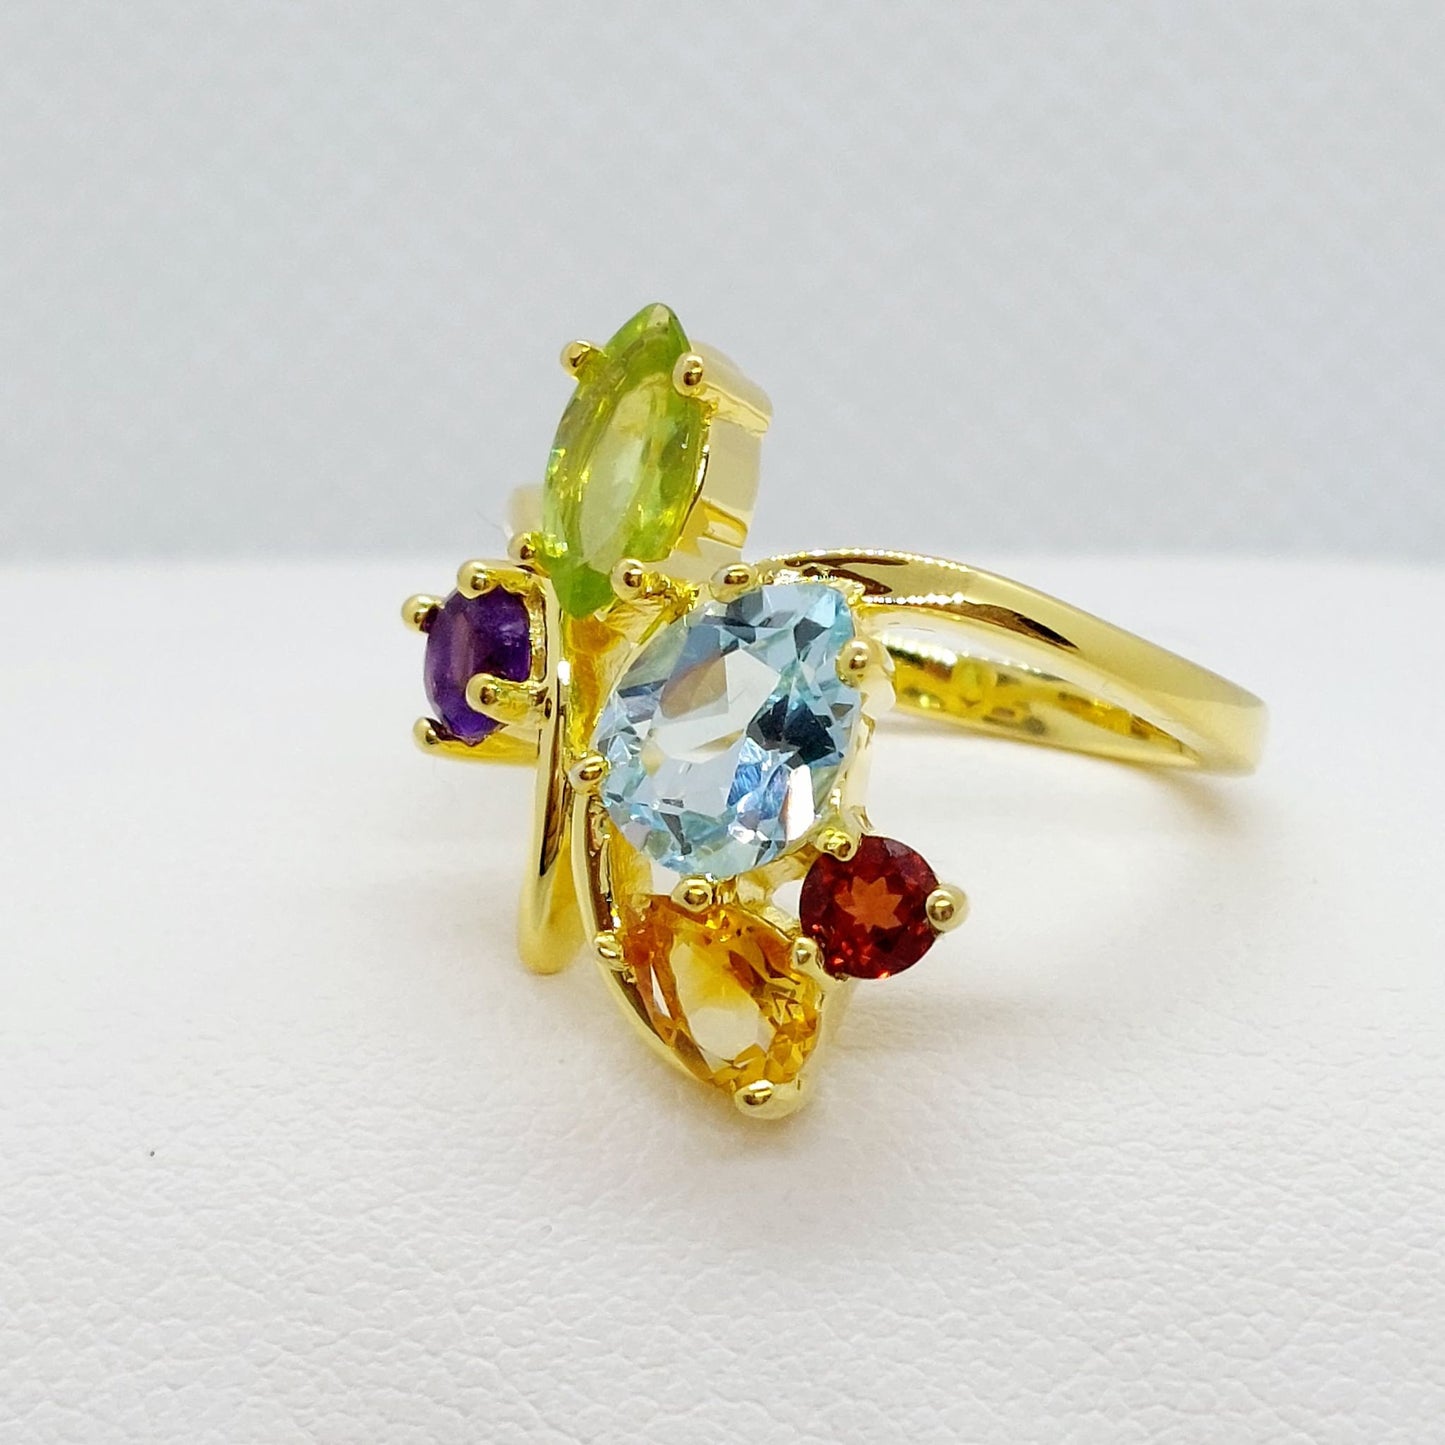 Natural Stone Ring with Topaz, Peridot, Citrine, Amethyst & Garnet in Sterling Silver Gold Plated